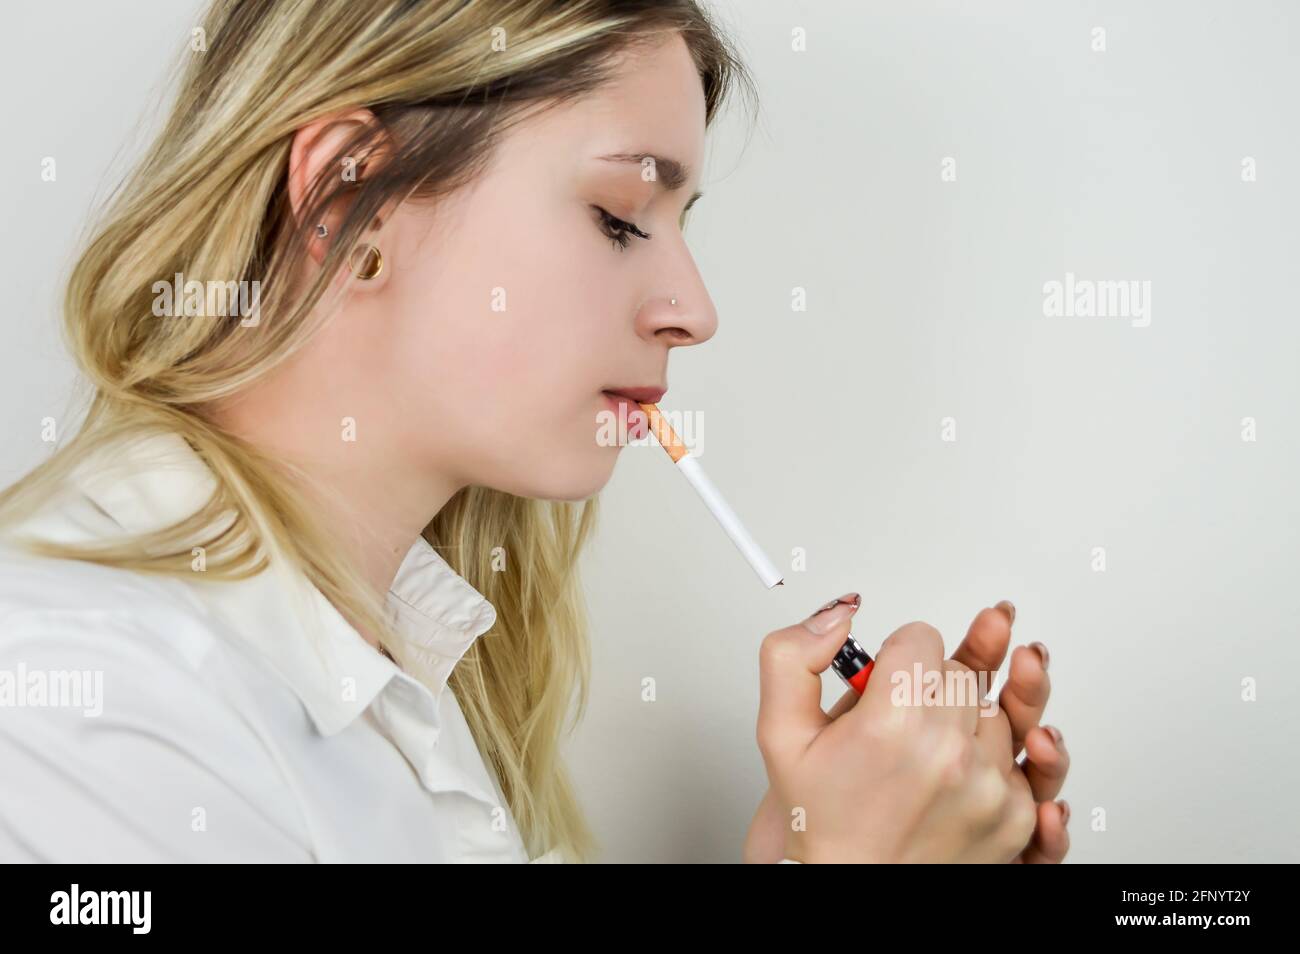 Portrait of a beautiful young blonde woman who is preparing to light a cigarette Stock Photo